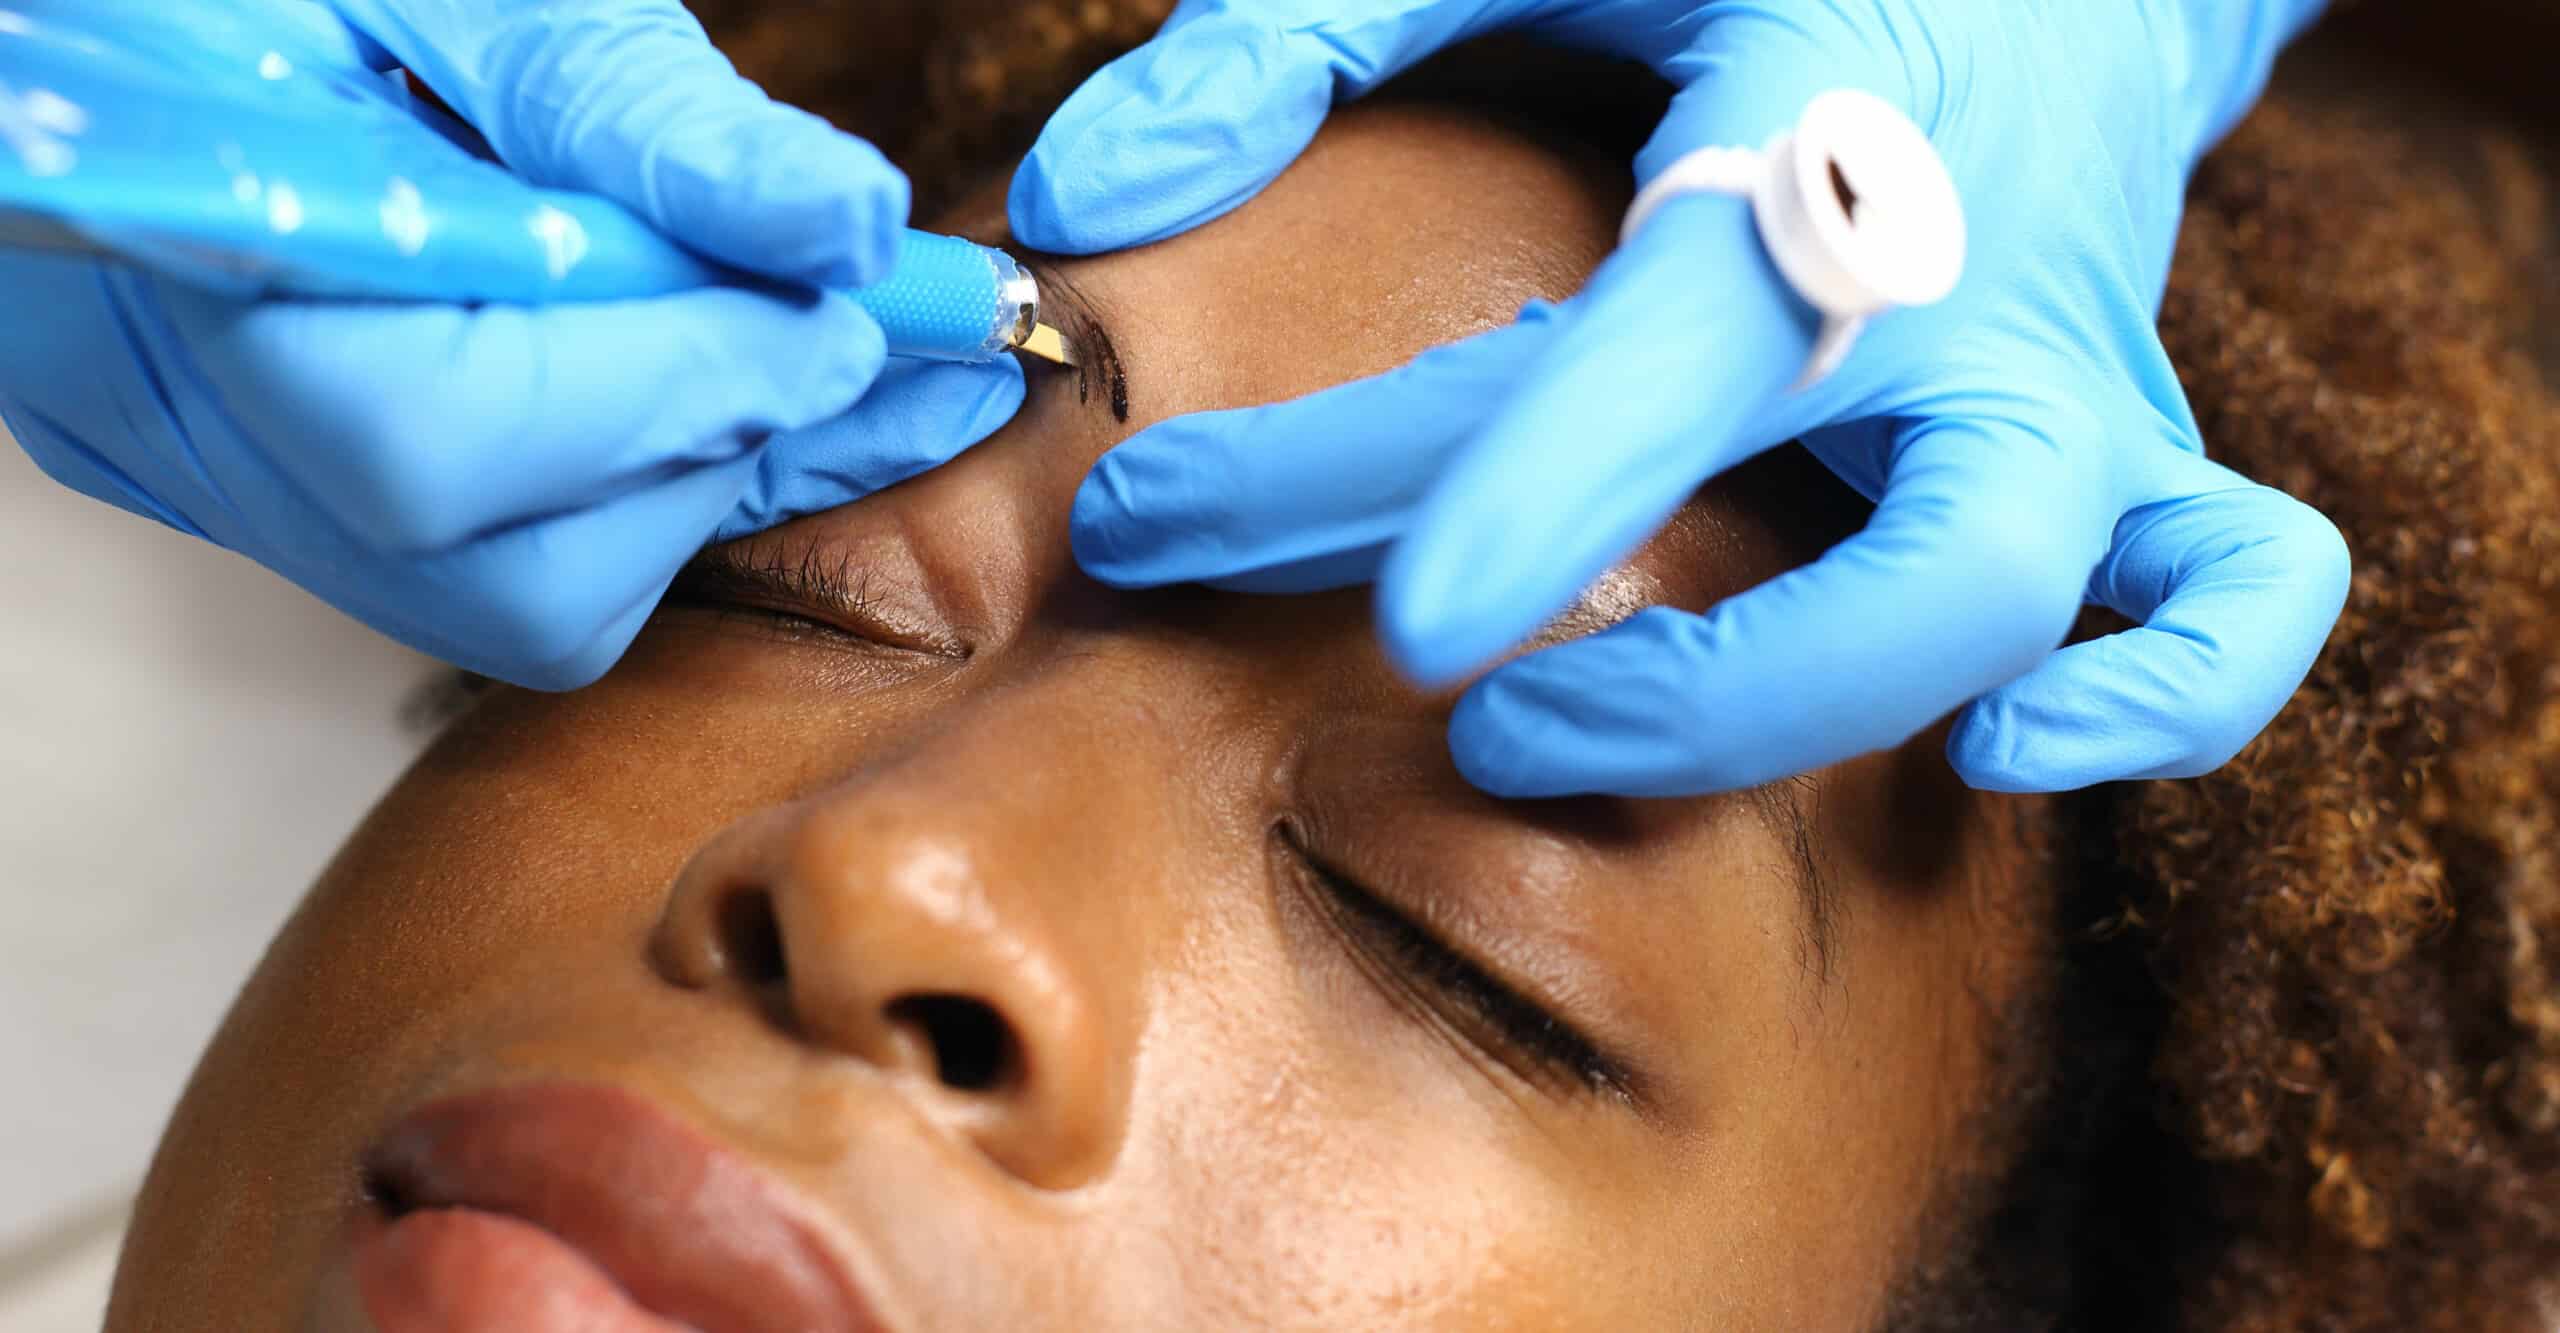 Woman is relaxed while laying down and getting her eyebrows microbladed.